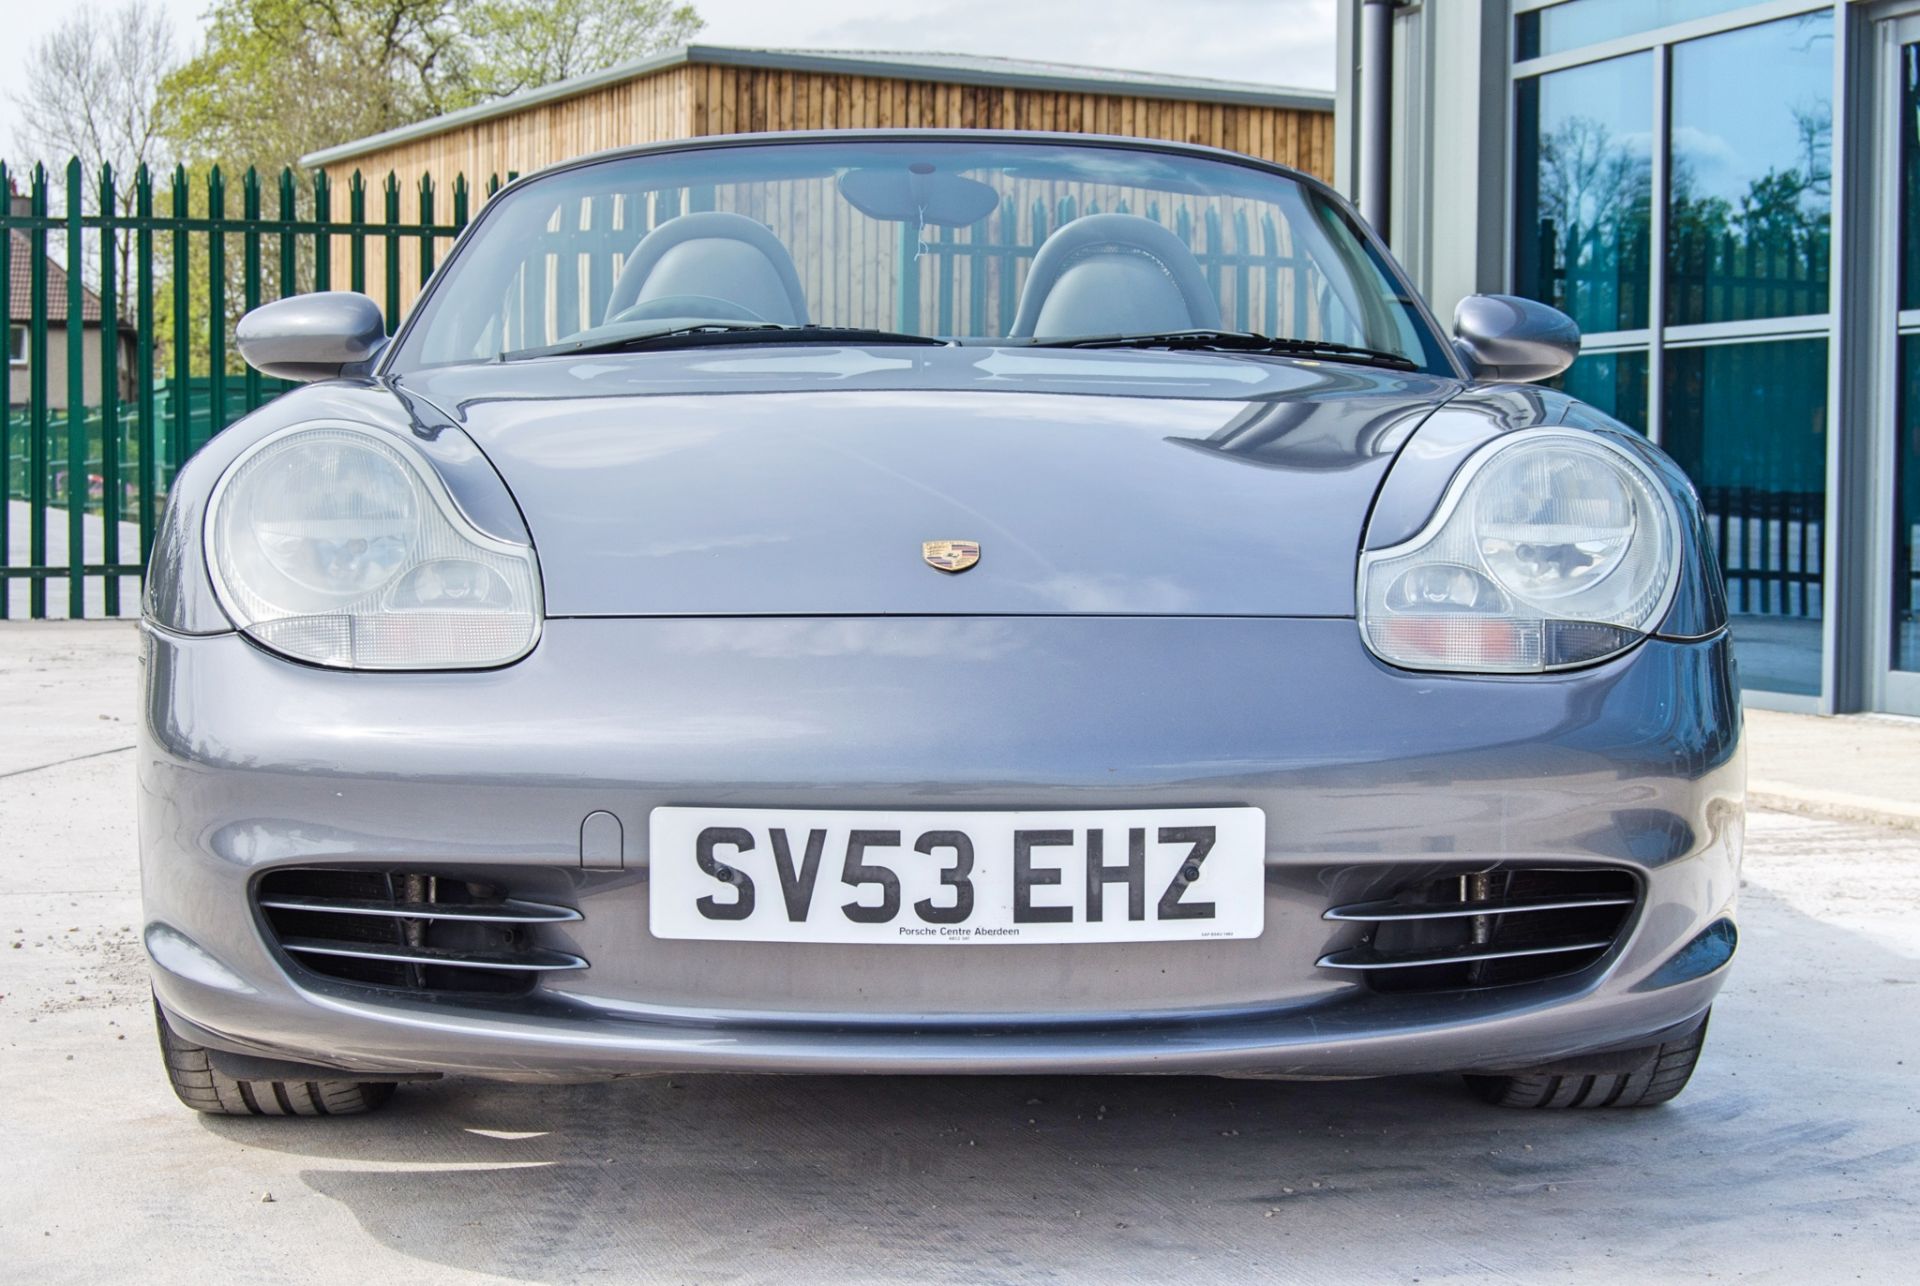 2003 Porsche Boxster 2.7 5 speed manual convertible roadster - Image 9 of 50